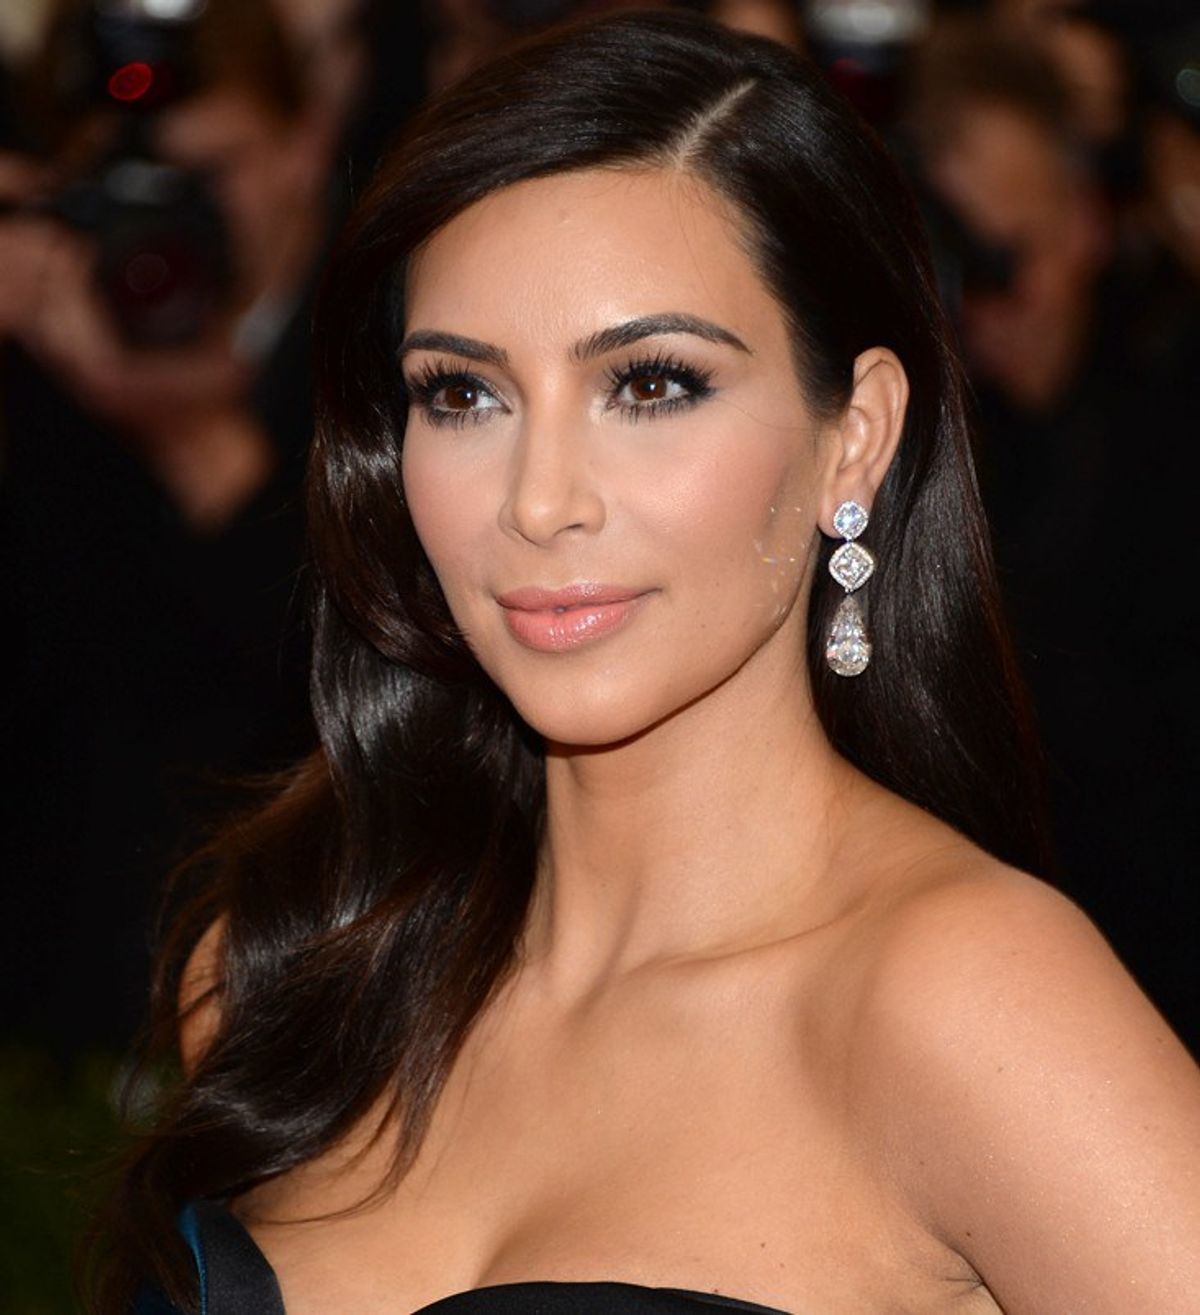 Why Are We Shaming Kim K For Being Robbed?